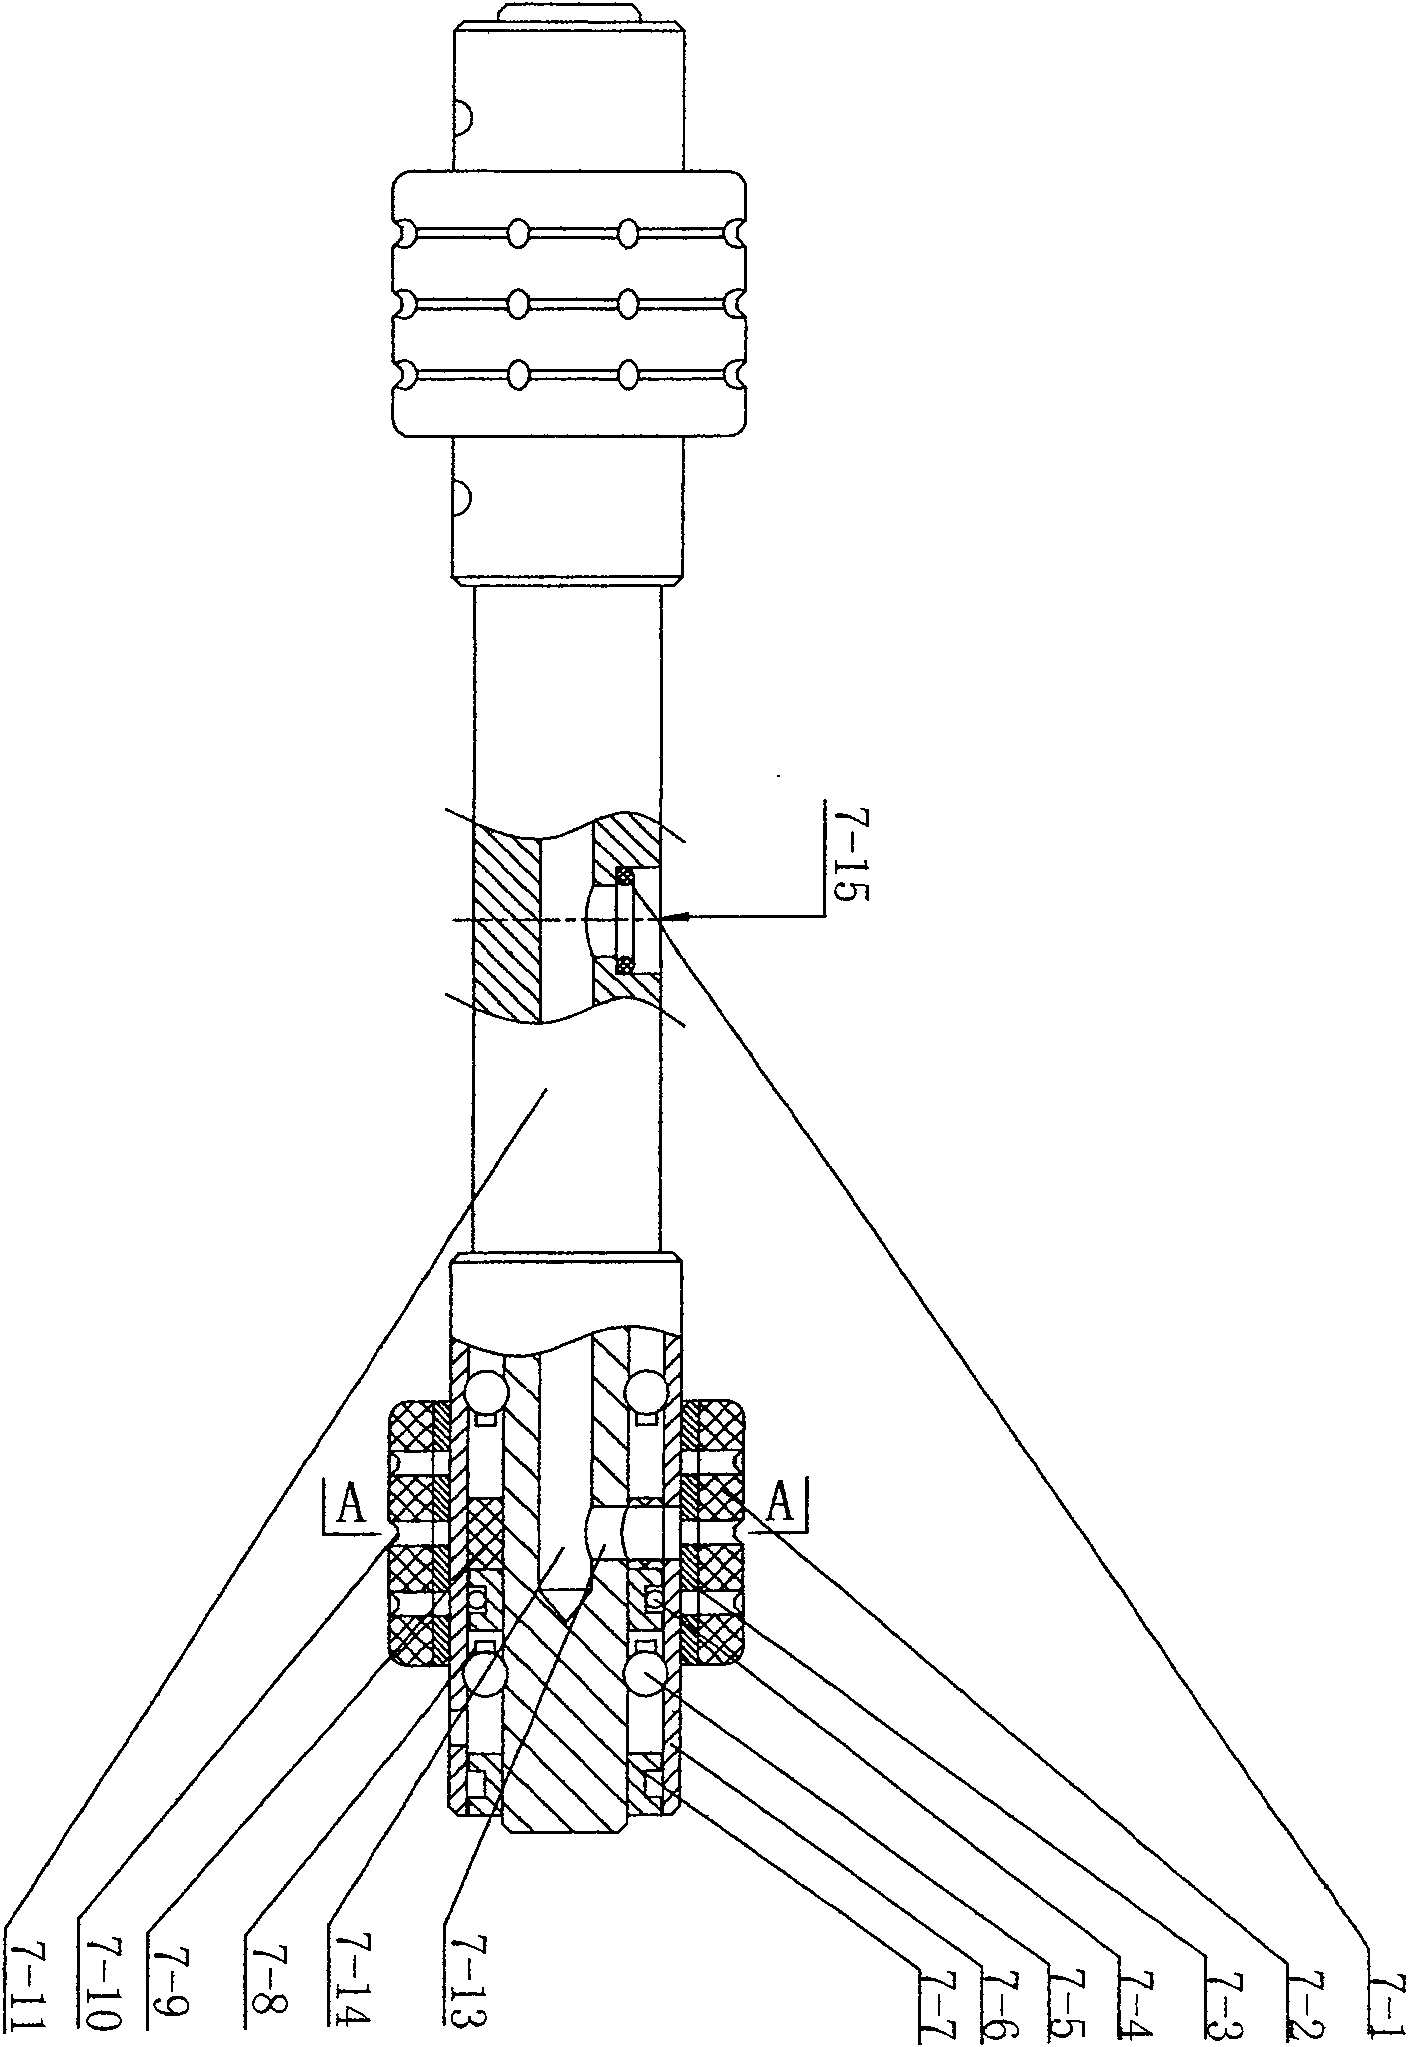 Elastic disc type compact spinning apparatus